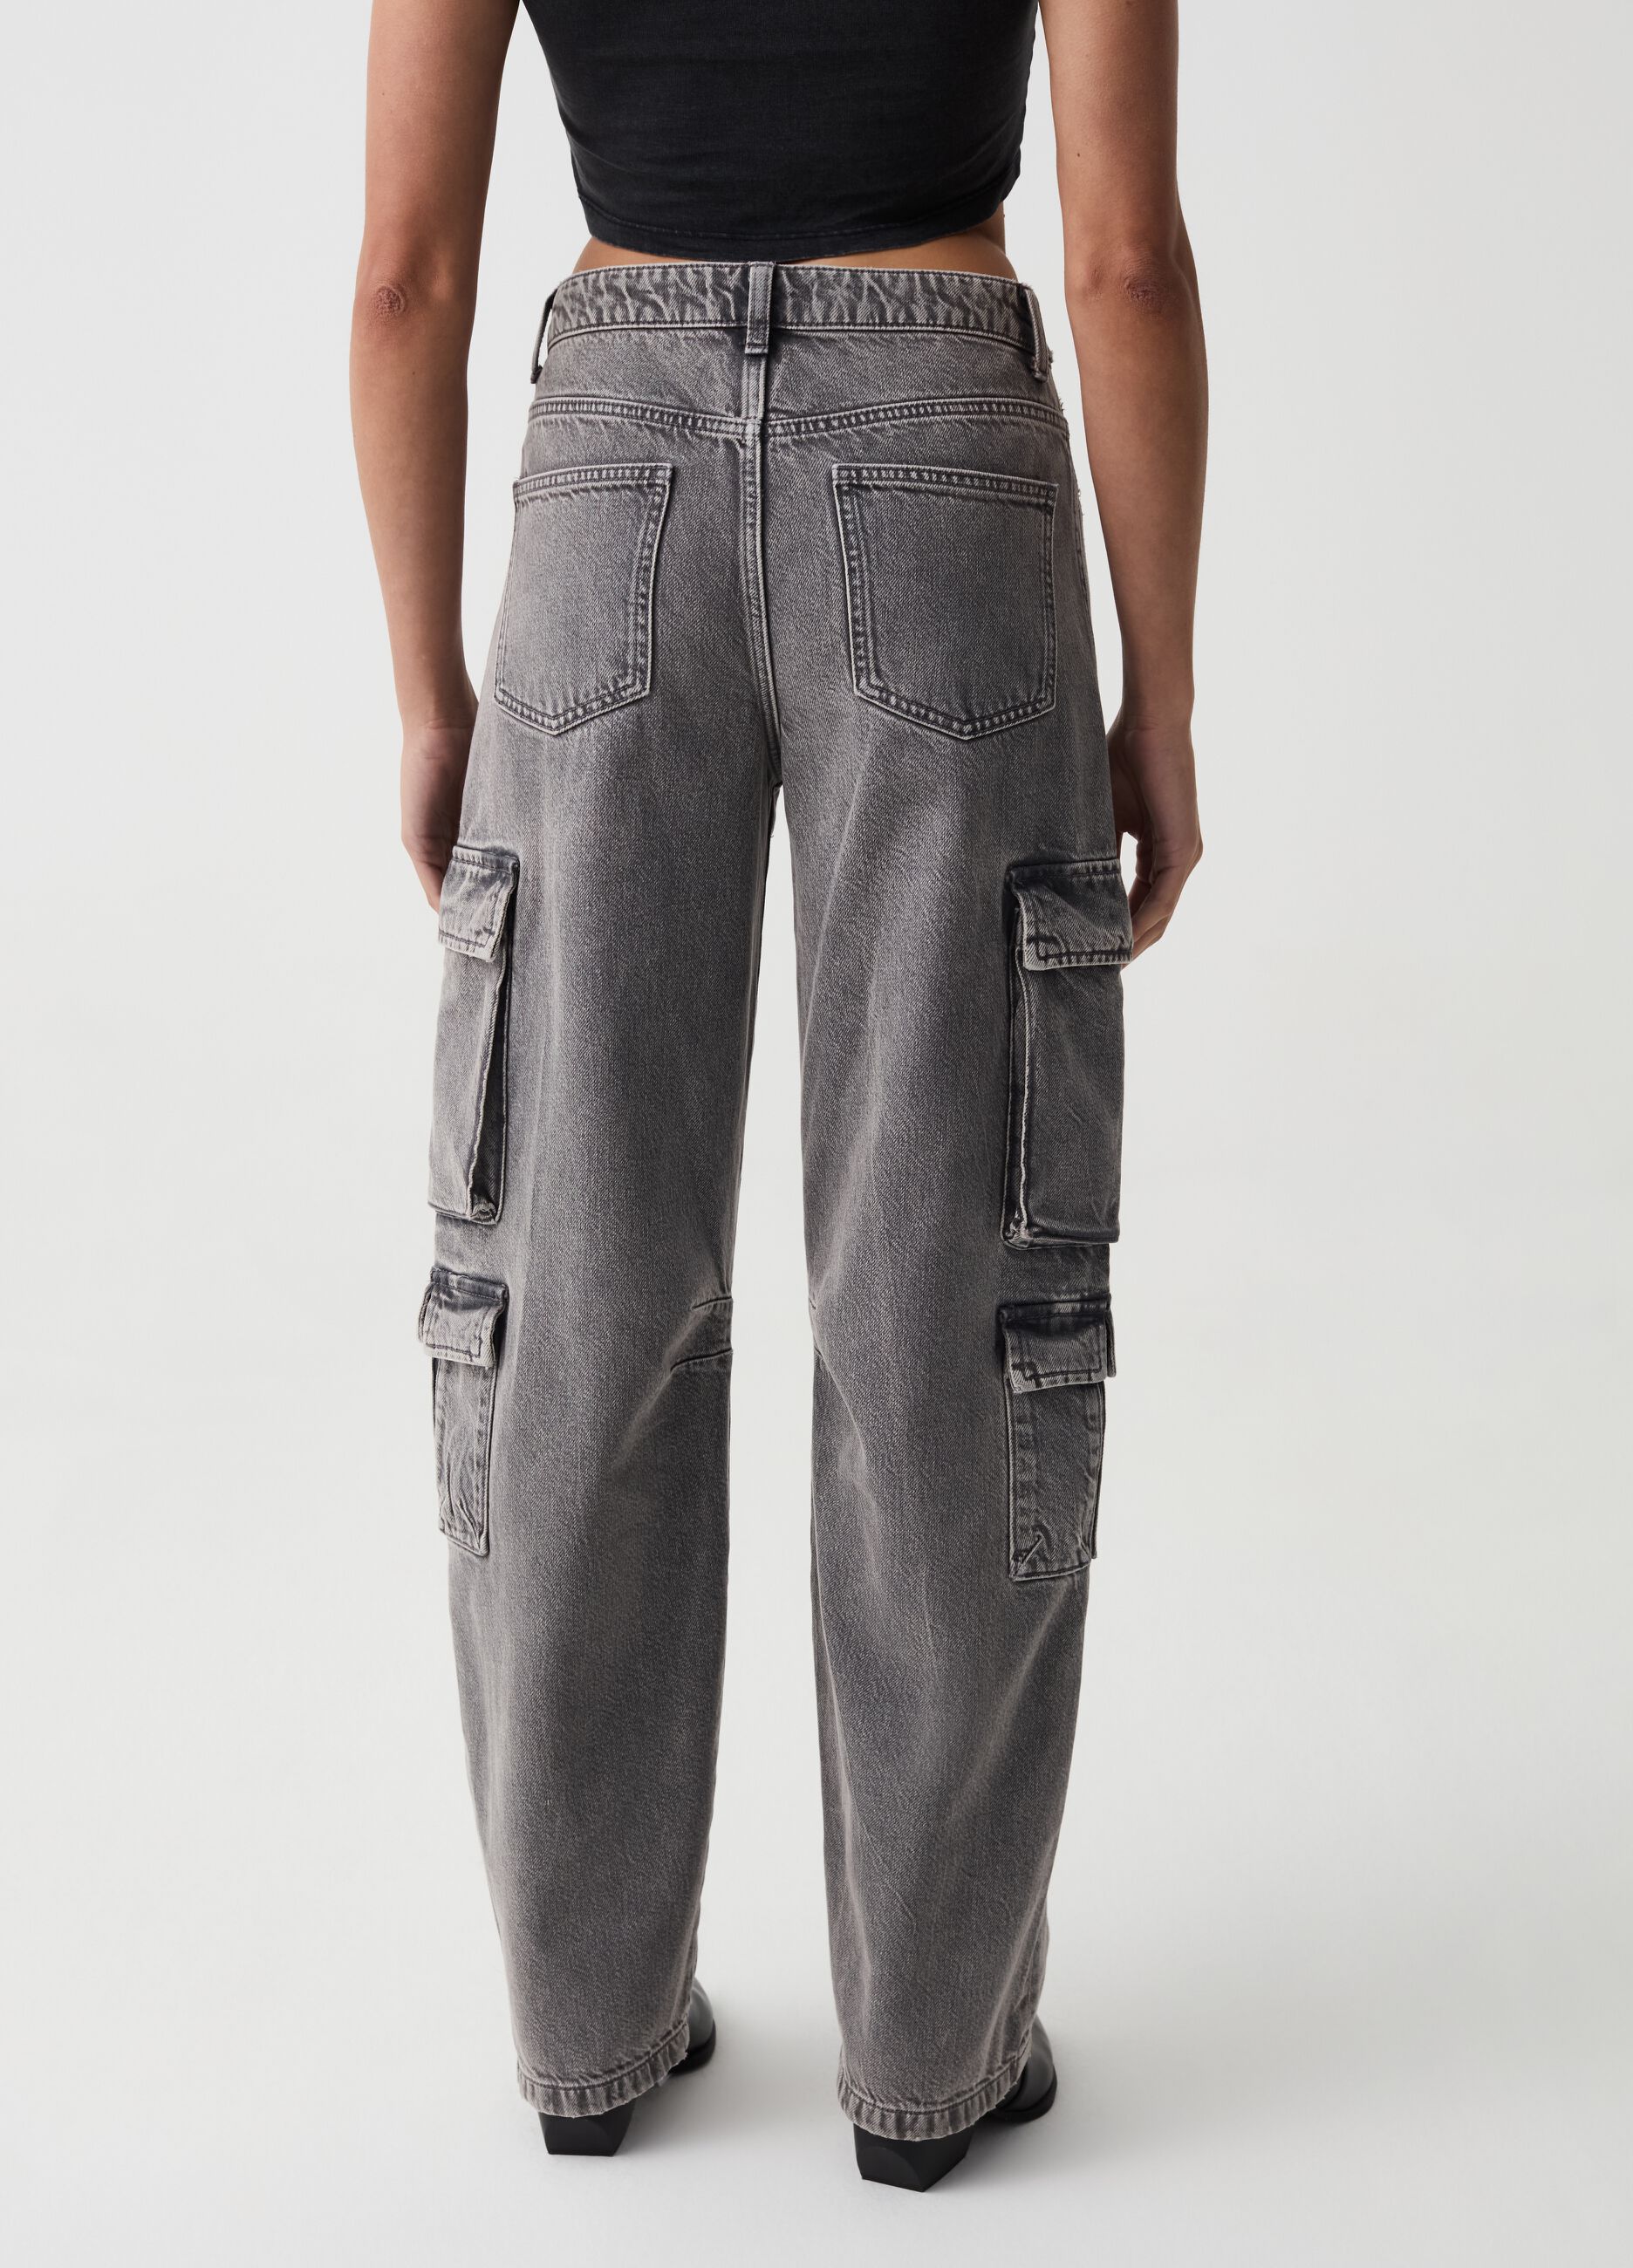 B.ANGEL FOR THE SEA BEYOND multi-pocket cargo jeans